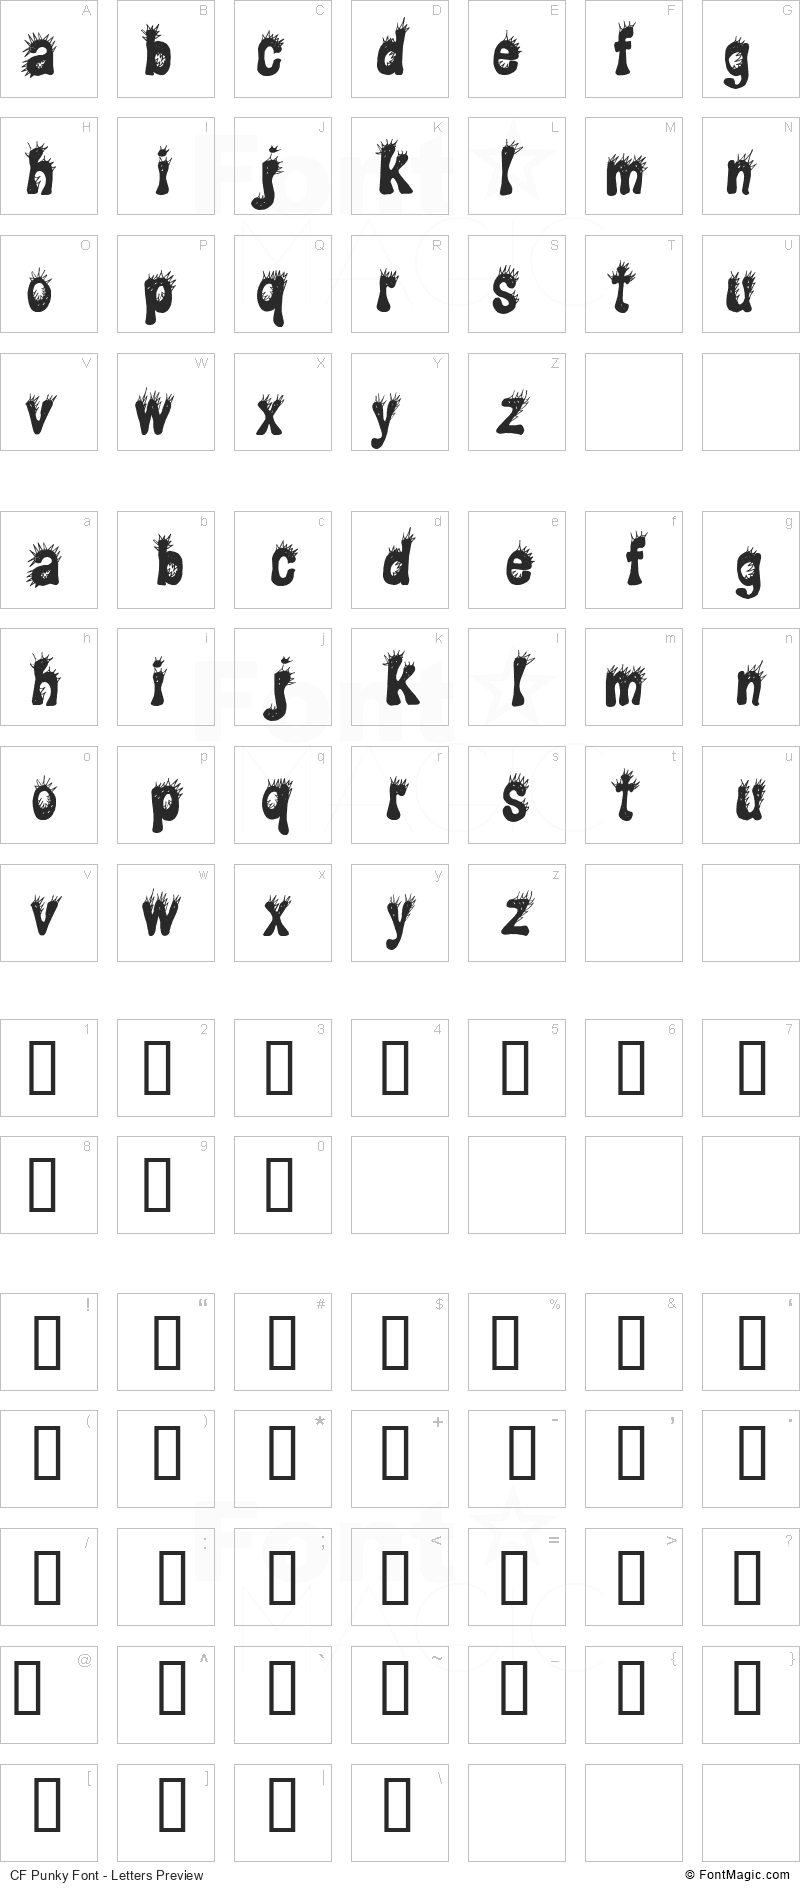 CF Punky Font - All Latters Preview Chart